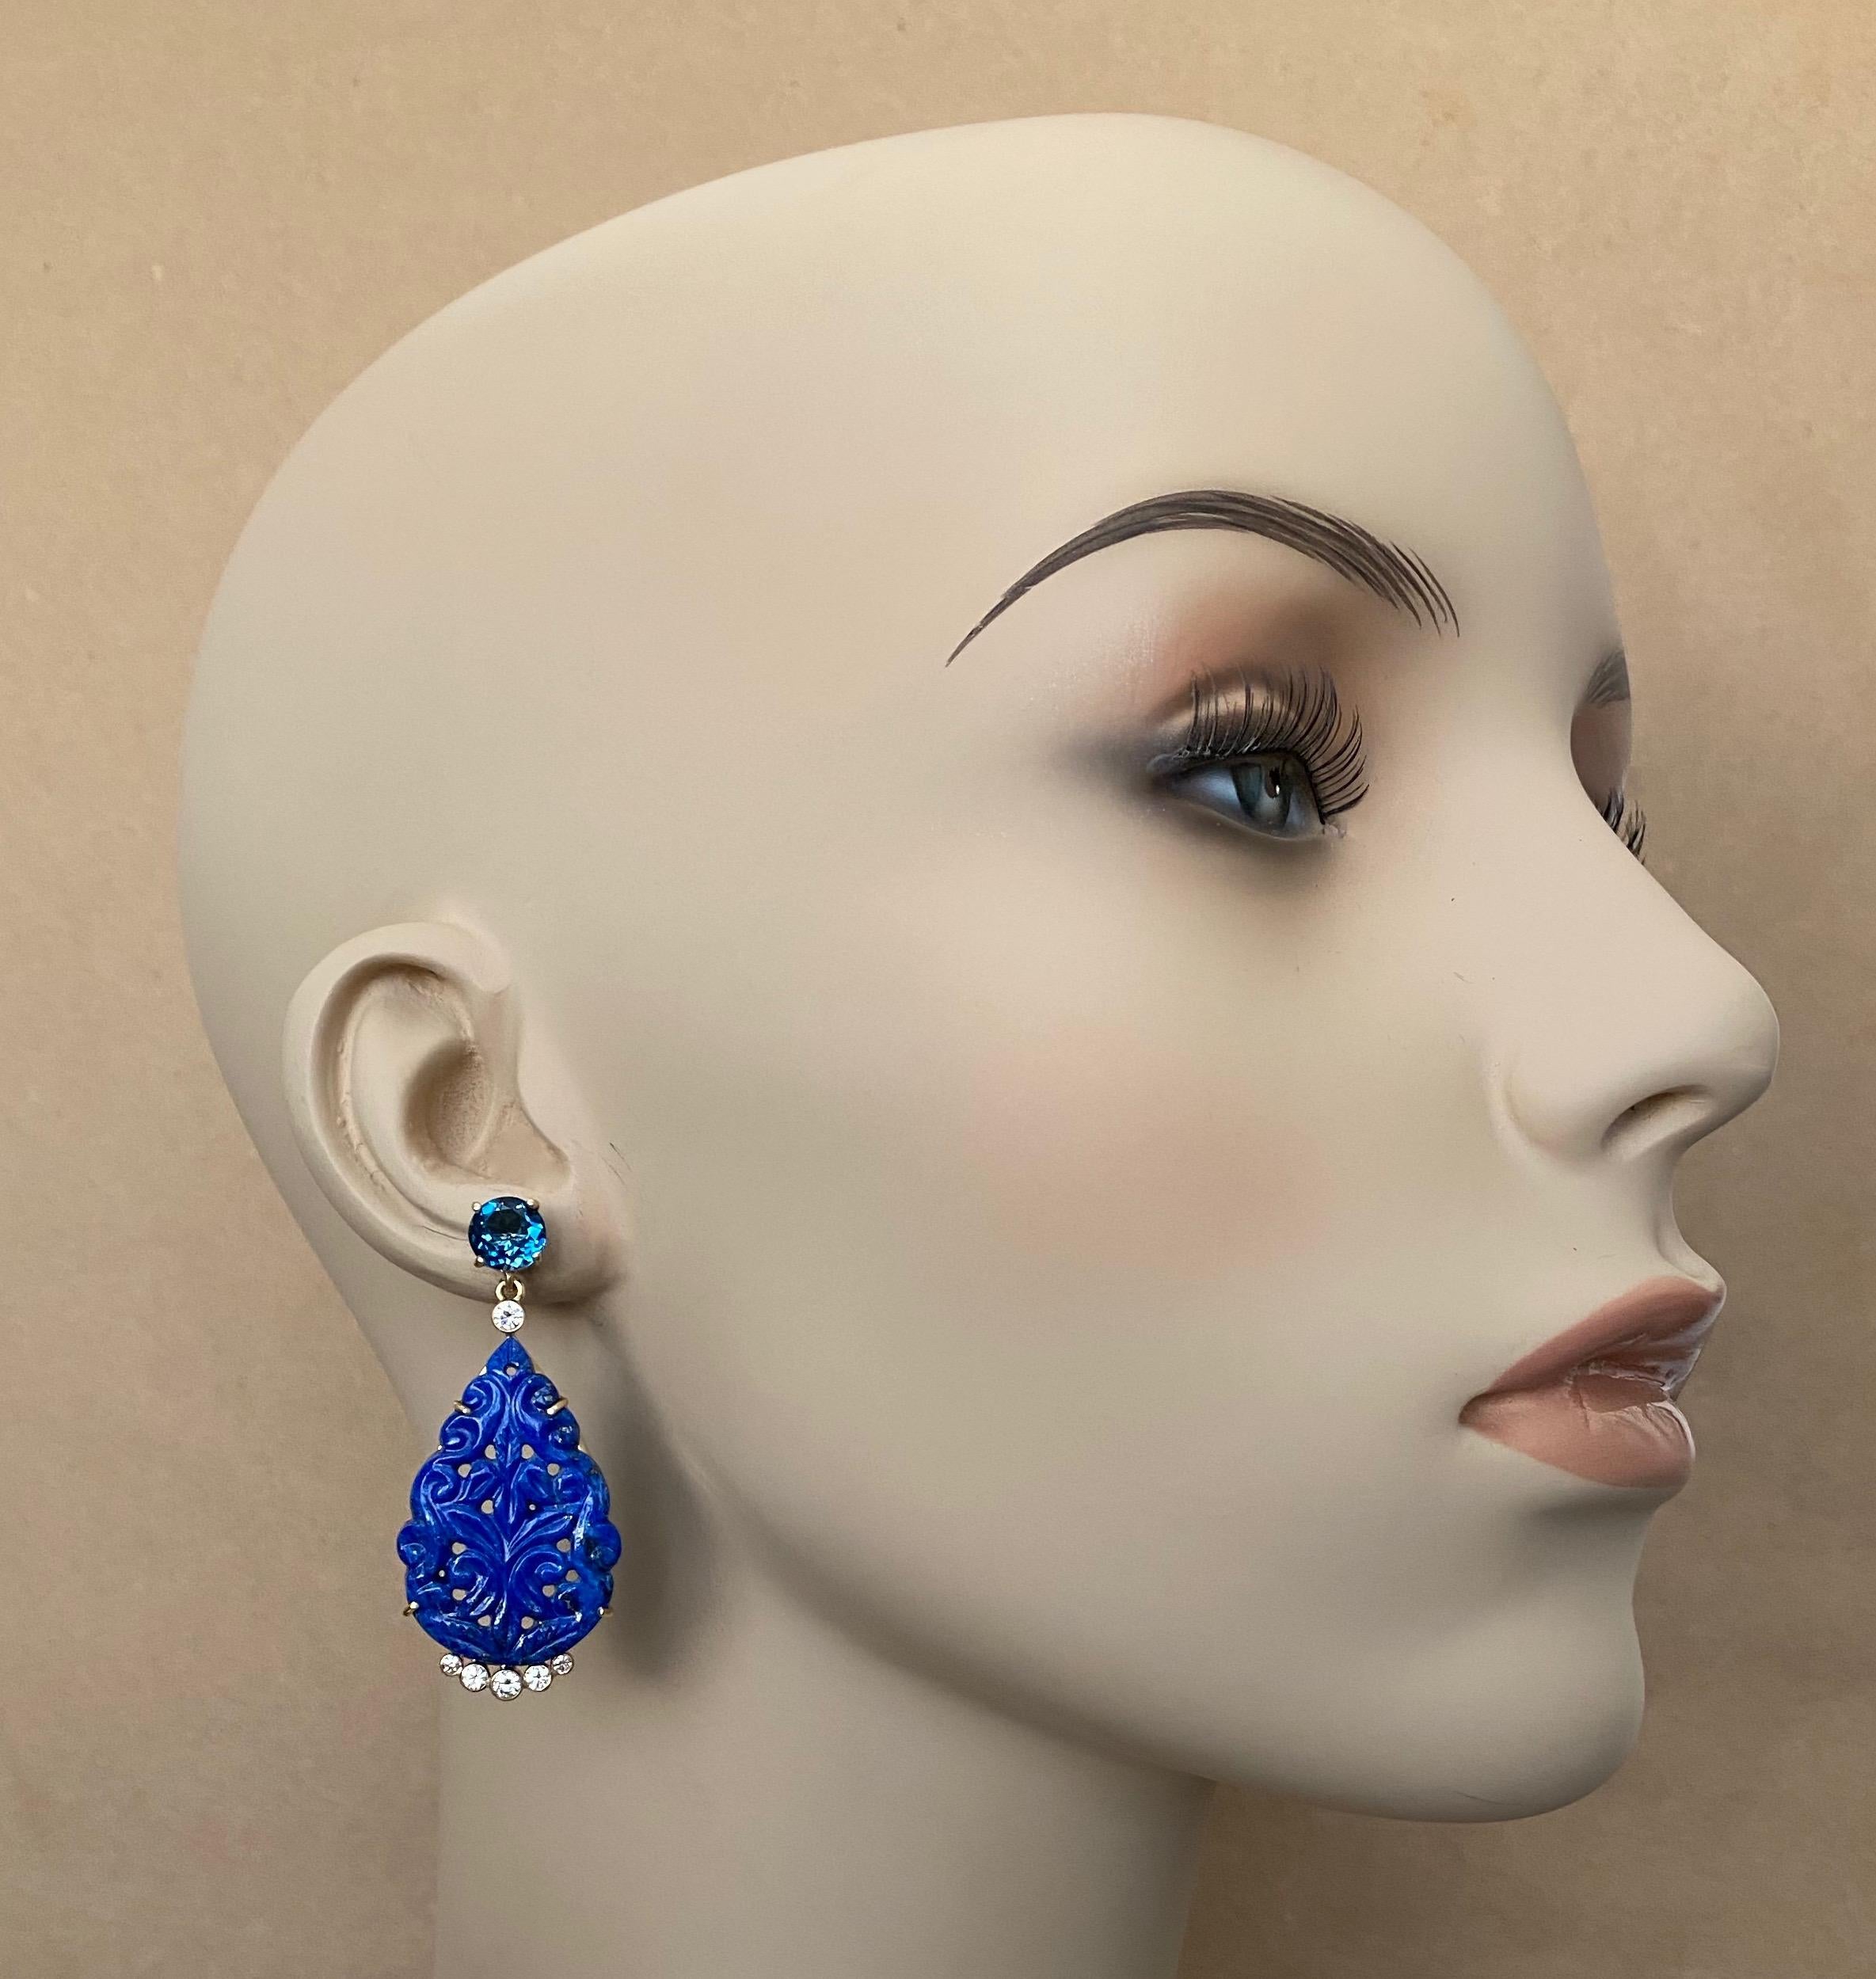 Lapis Lazuli is paired with London blue topaz in these exotic dangle earrings.  The plaques are exquisitely carved in an Indian influenced floral design.  The lapis (origin: Afghanistan) is bright blue with some pyrite flecks typically found in the